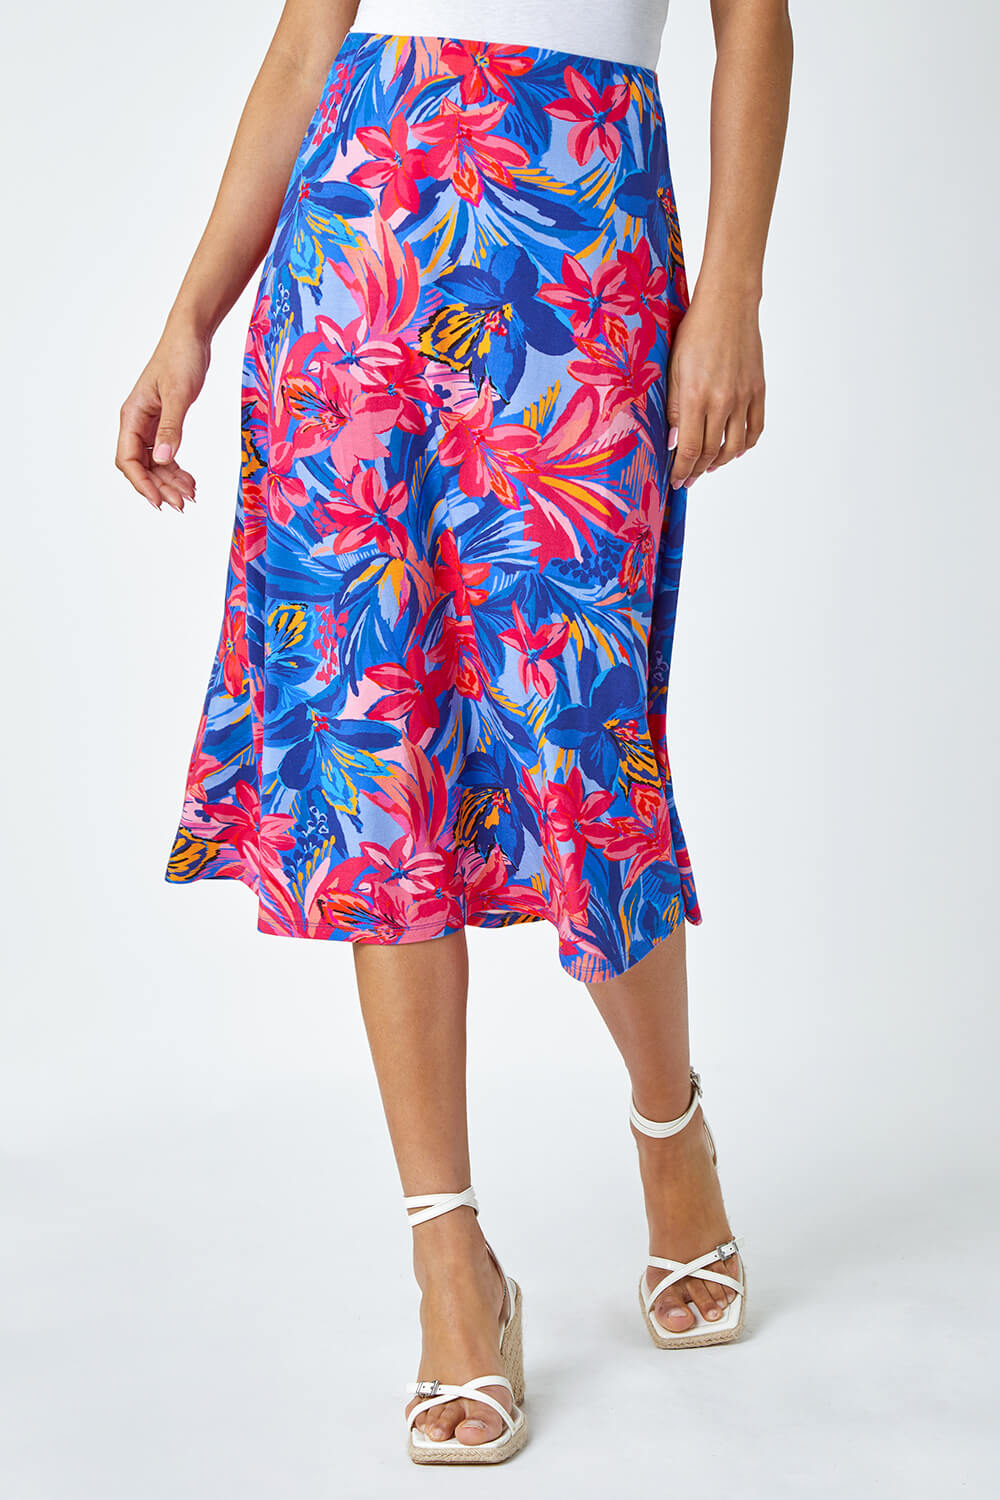 Blue Tropical Floral Stretch Panel Skirt, Image 4 of 5